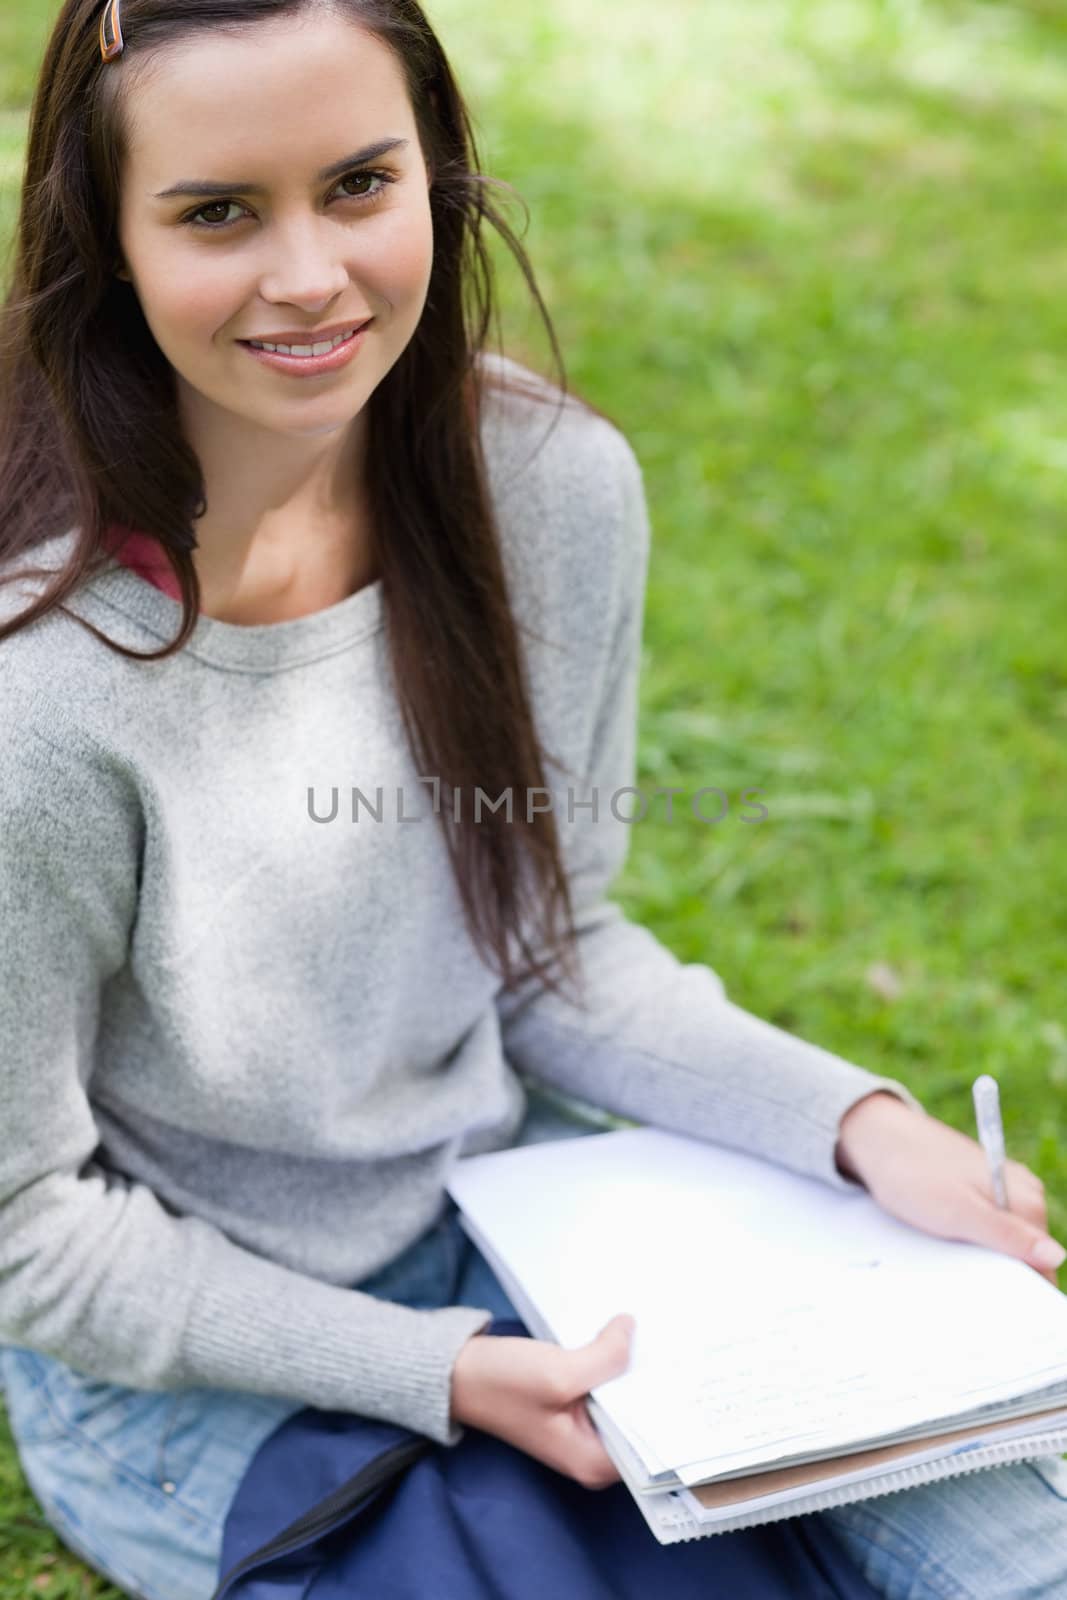 Happy student sitting in a park while looking at the camera and holding school books